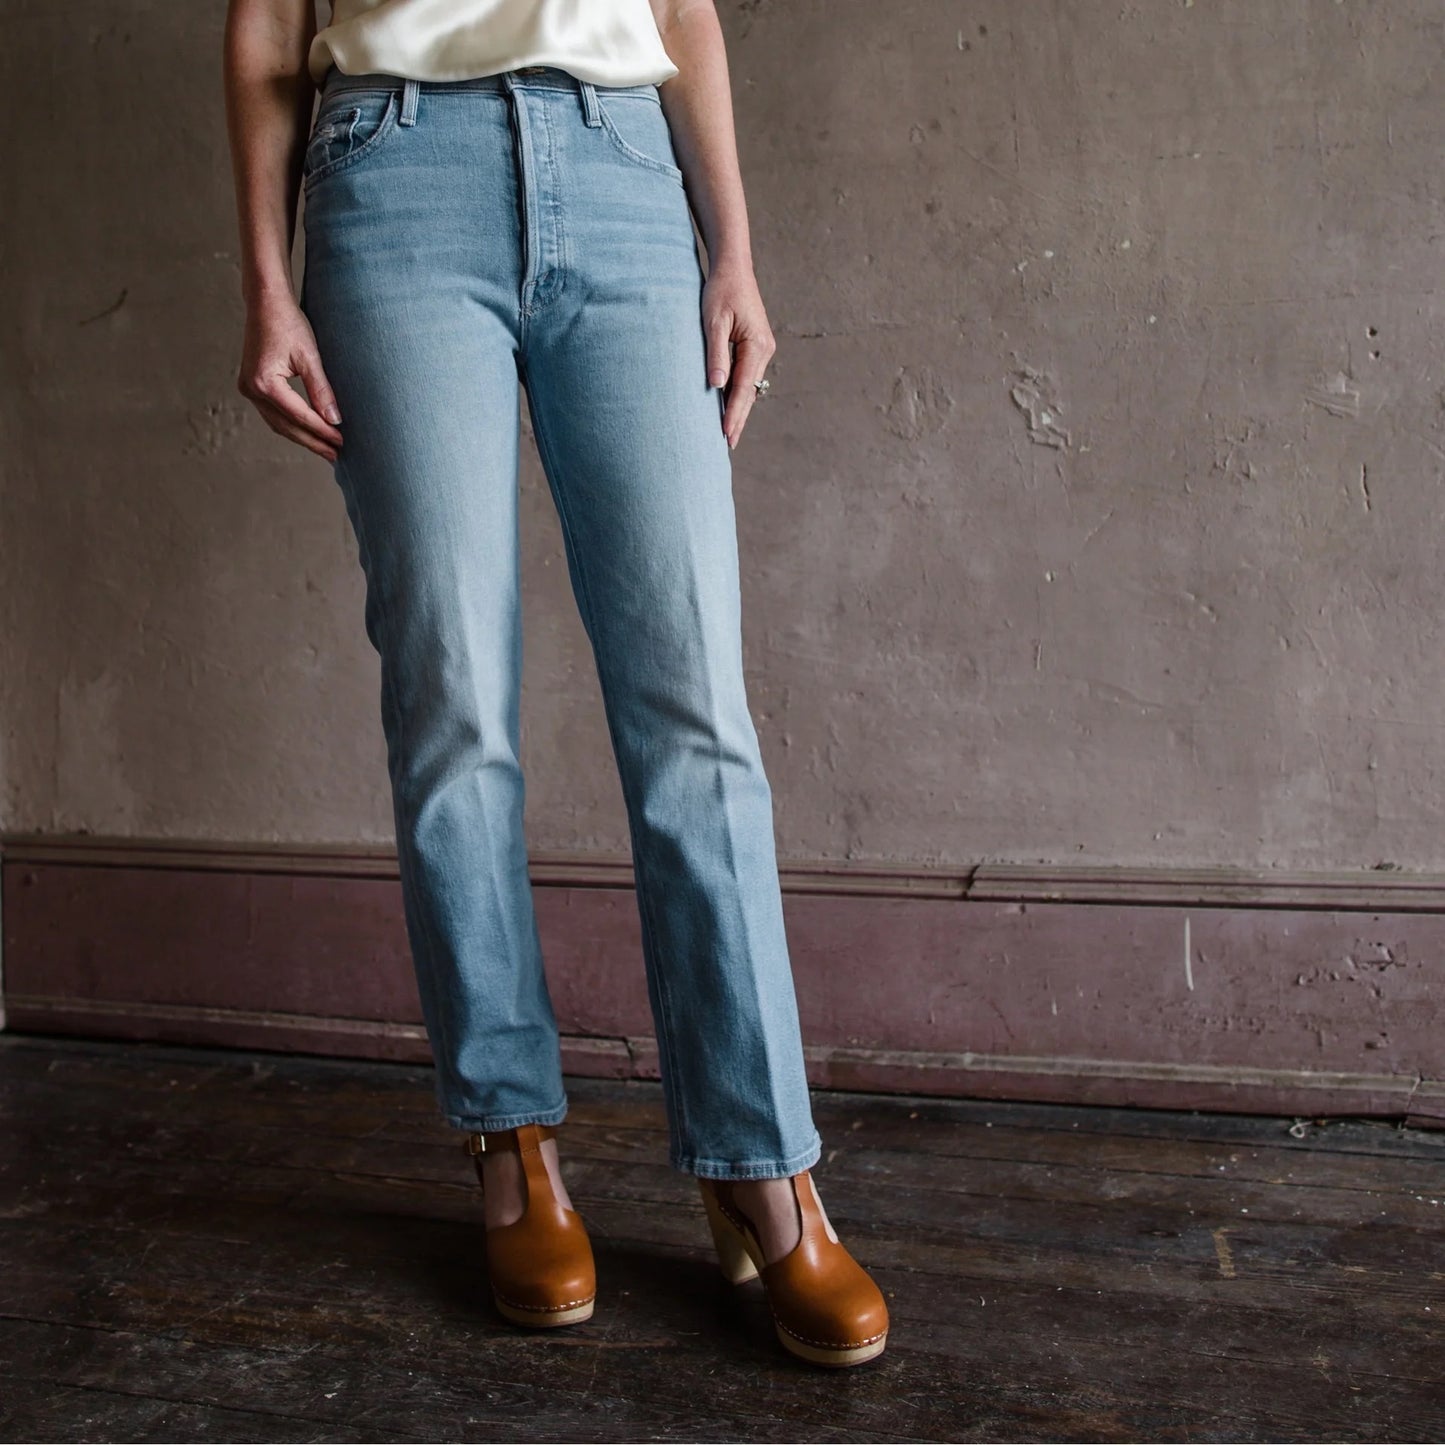 The Tripper Ankle Denim Ripe for the Squeeze